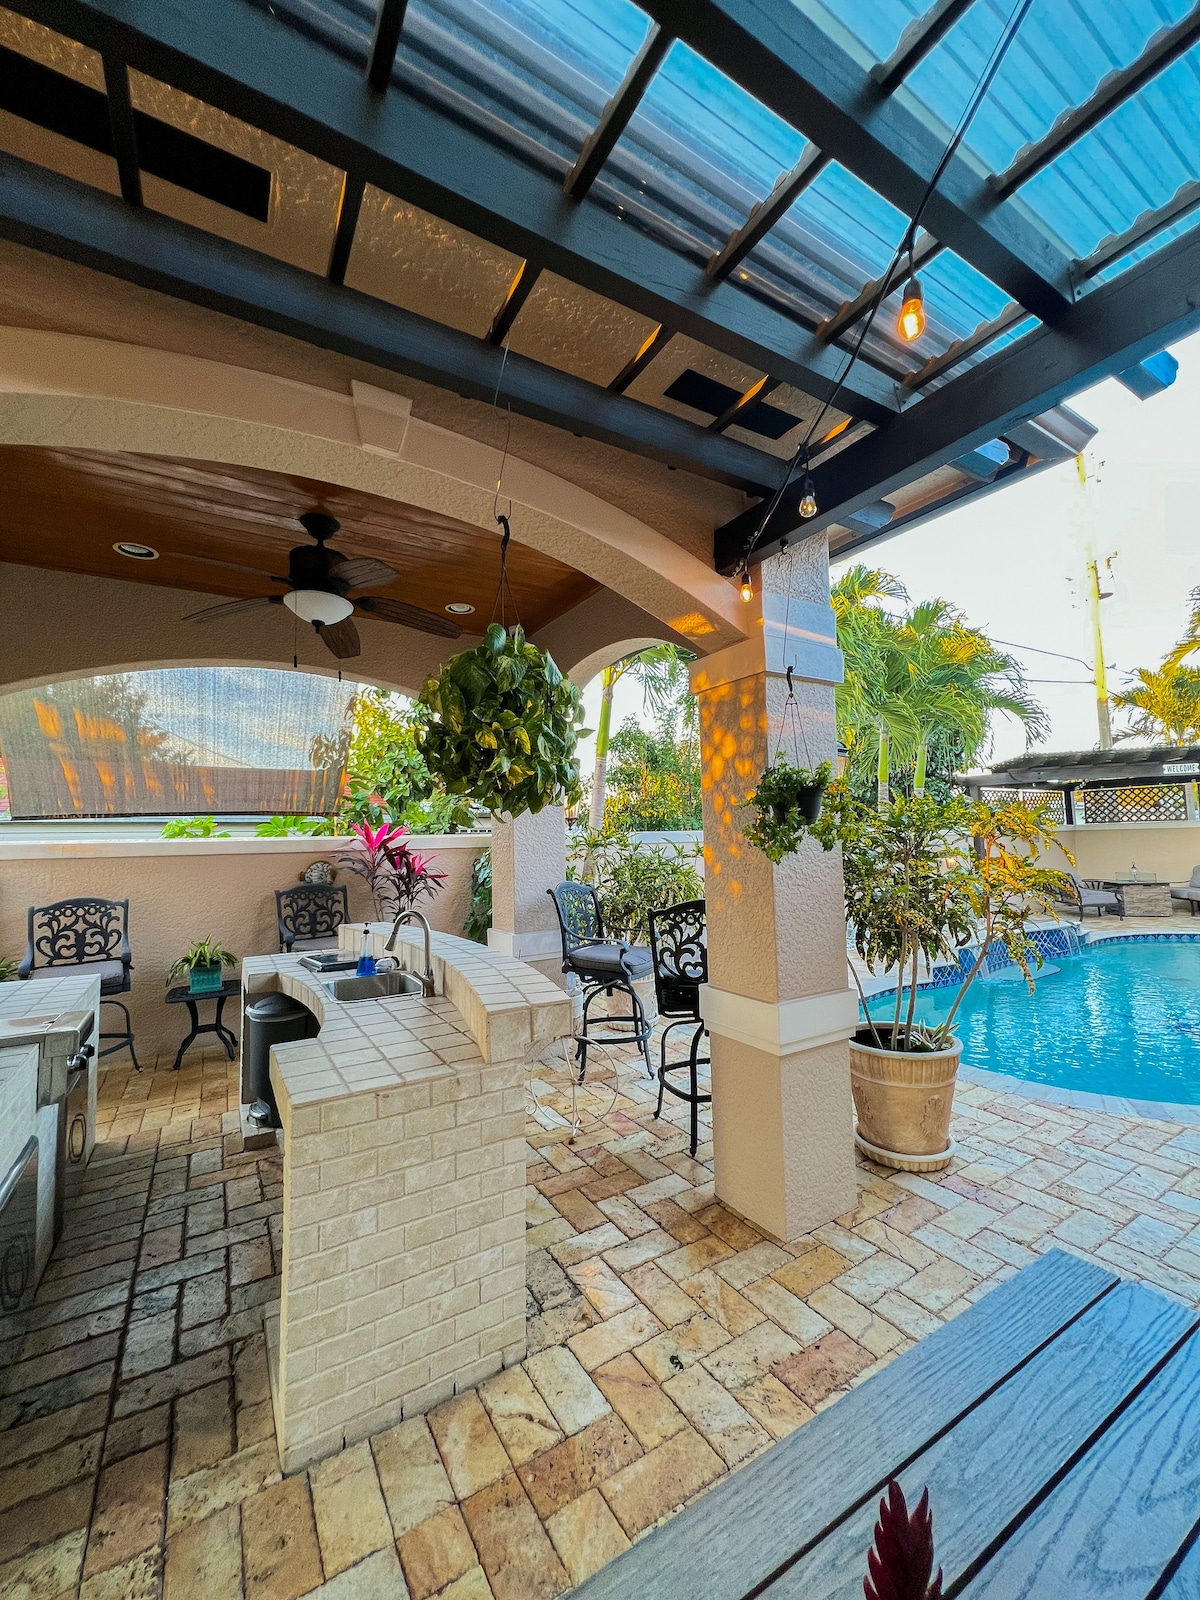 Little Italy In Miami - Heated Pool/BBQ/HotTub/Spa